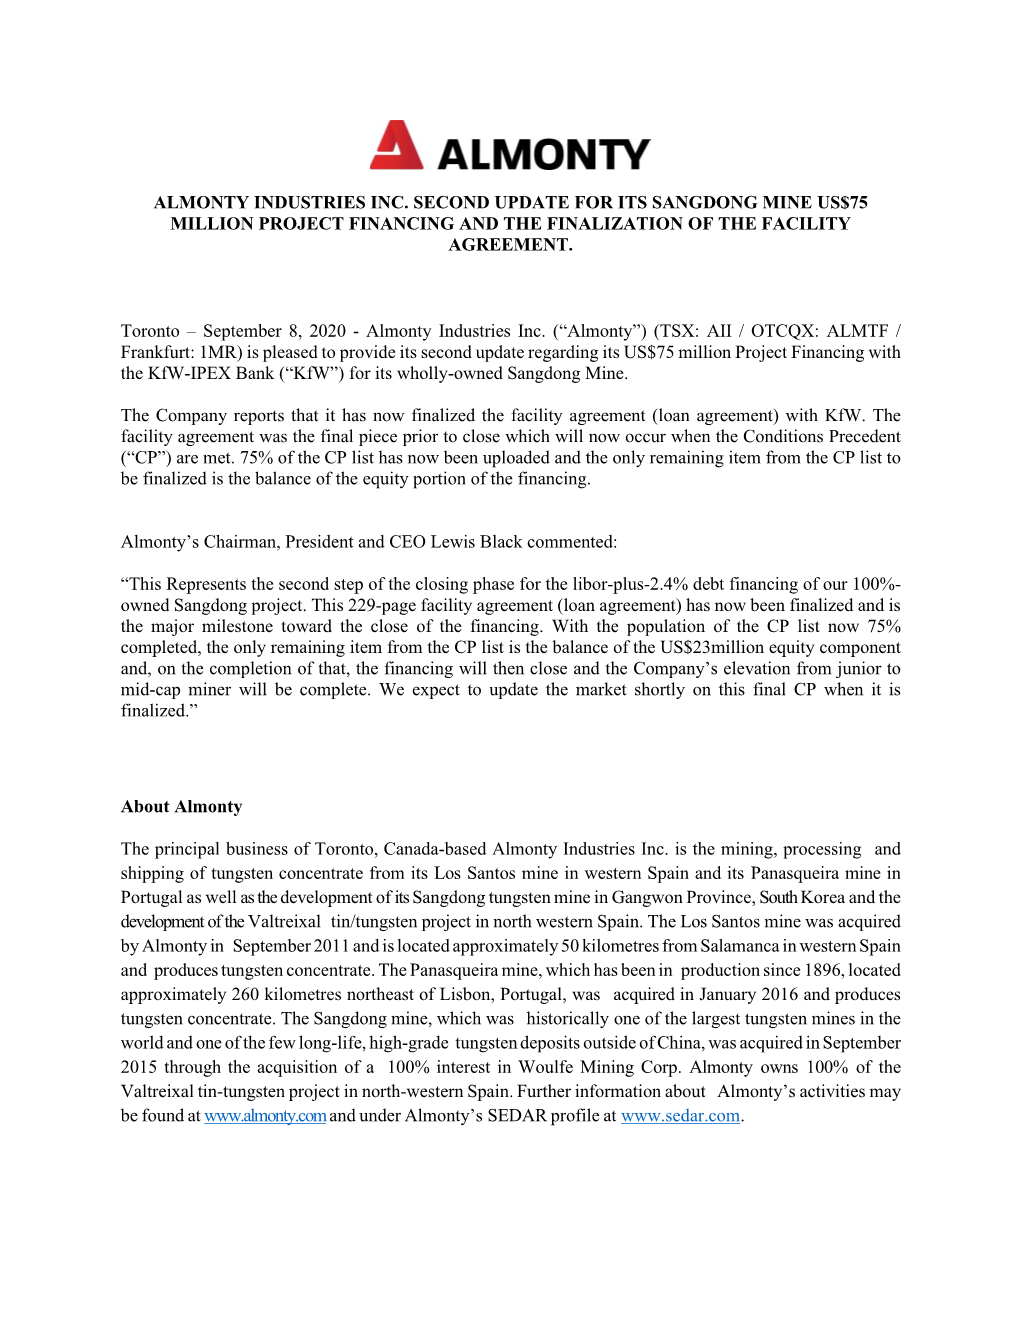 Almonty Industries Inc. Second Update for Its Sangdong Mine Us$75 Million Project Financing and the Finalization of the Facility Agreement